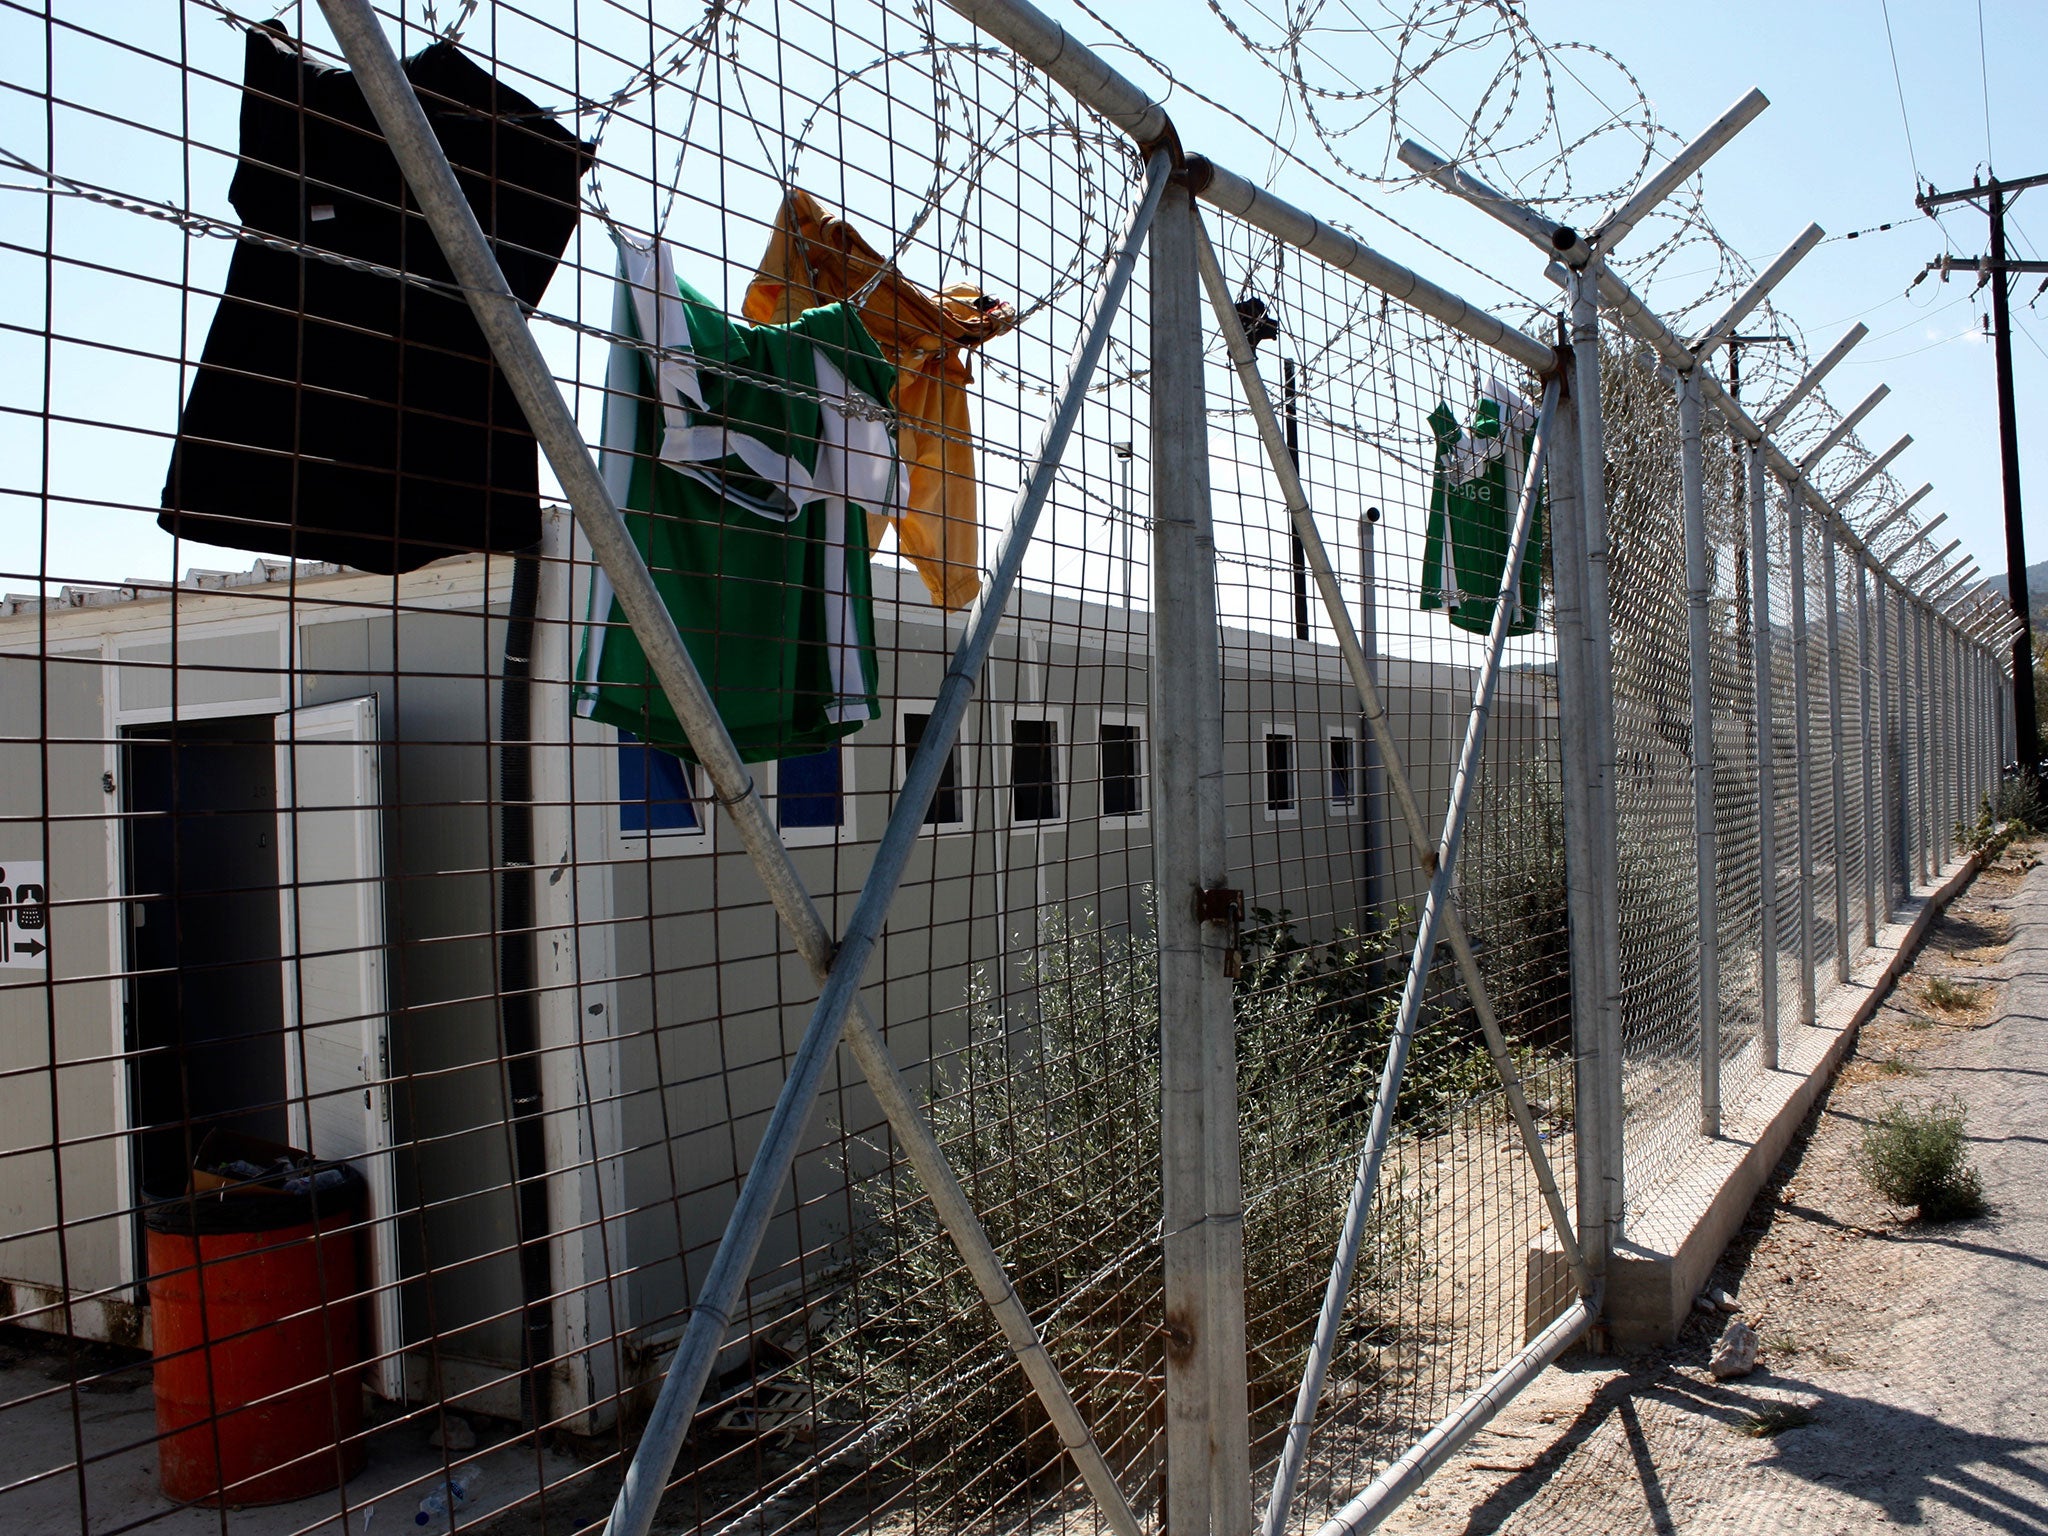 Clothes hung out to dry at the Vial detention centre on the Greek island of Chios